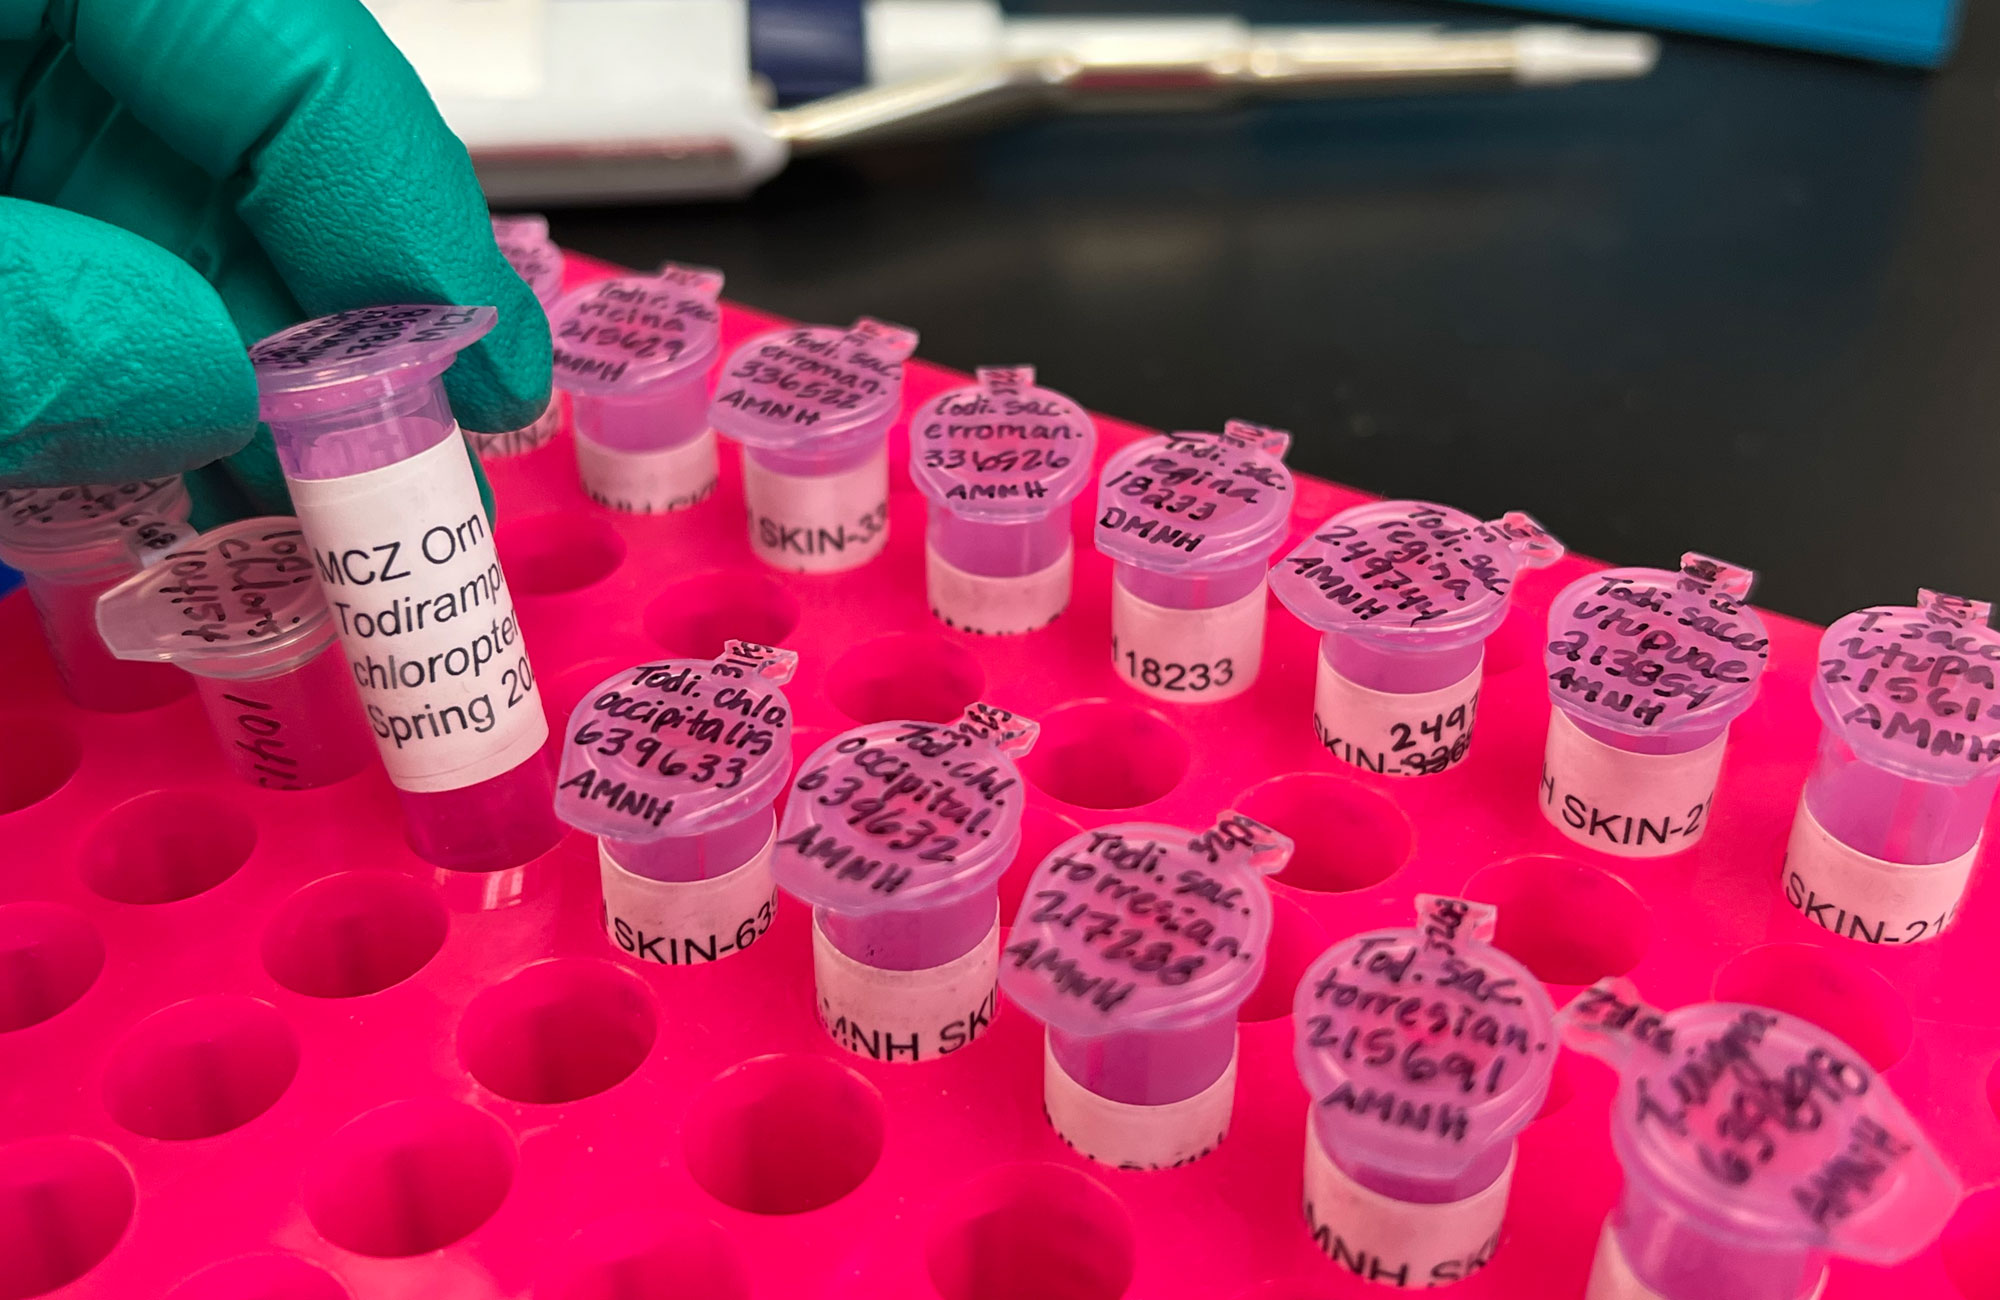 Plastic centrifuge tubes with tissue samples from Australo-Pacific kingfishers. The photo shows a pink plastic centrifuge tube holder with two rows of light purple centrifuge tubes, each labeled with a marker on a cap and also with a printed paper label affixed to the side. A person's gloved hand is holding one tube partially out of the holder so that the label can be seen.